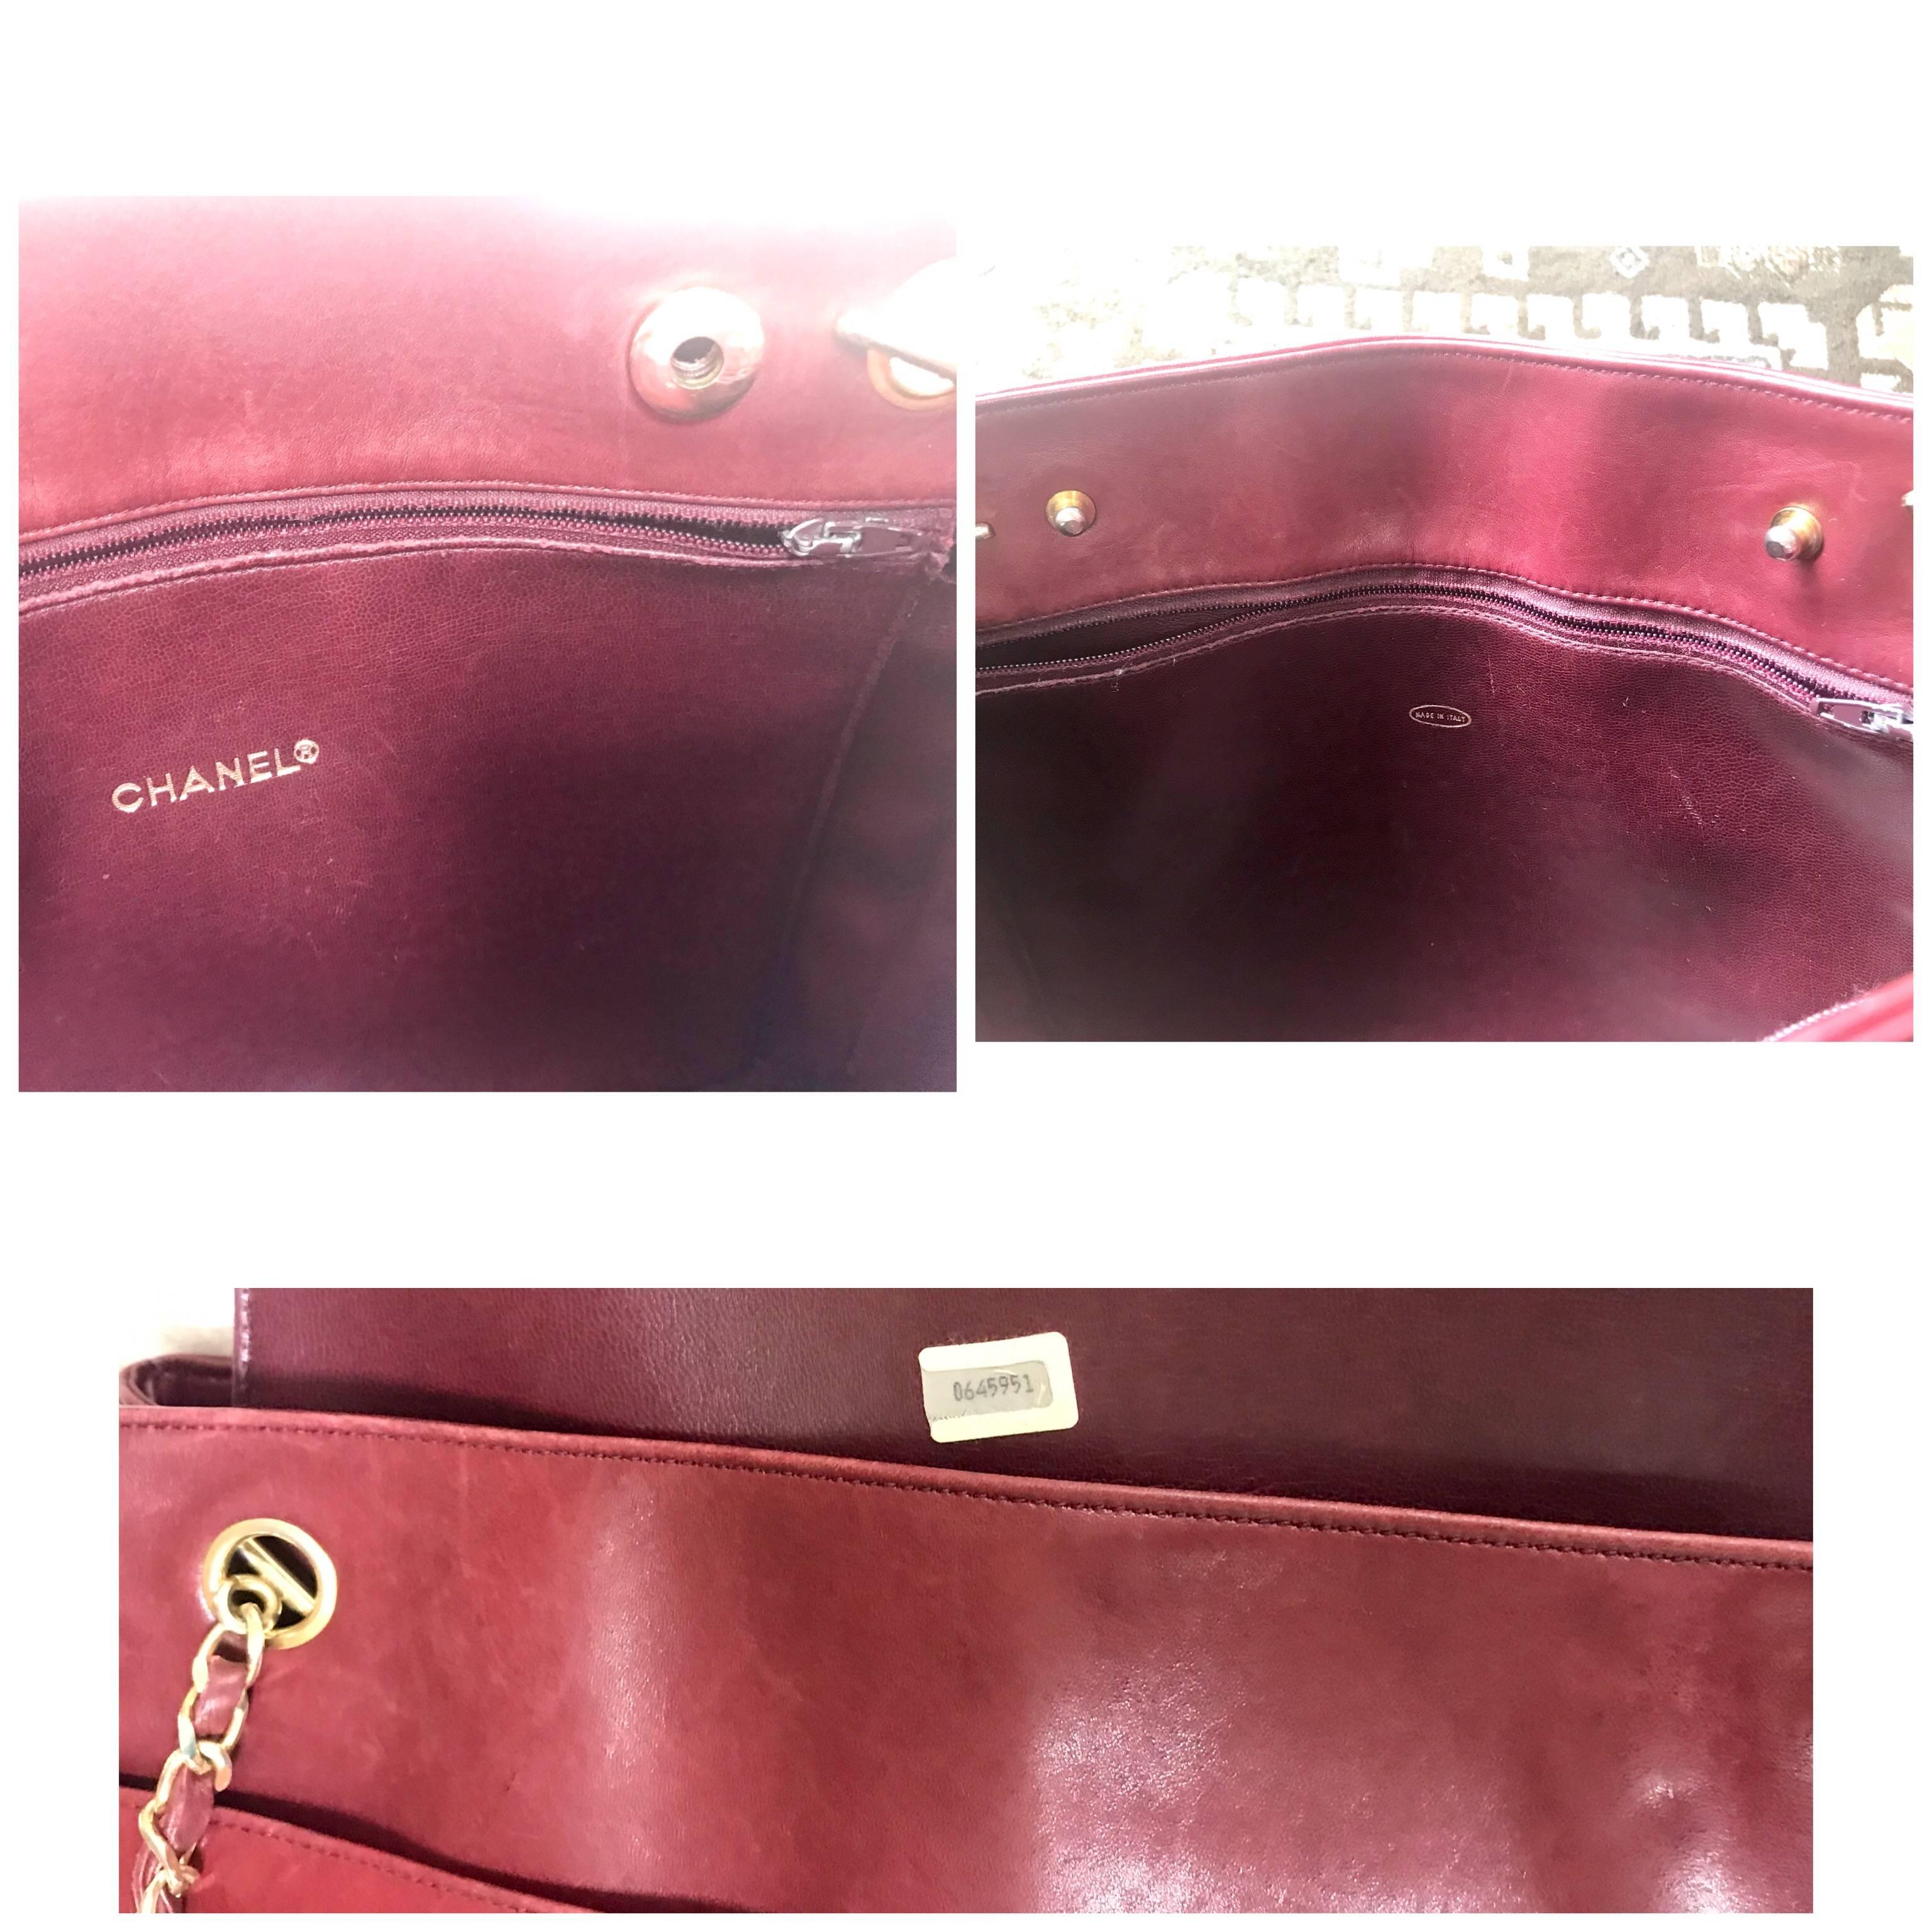 Chanel Vintage wine leather tote bag with gold chain handles and CC motif charm For Sale 1